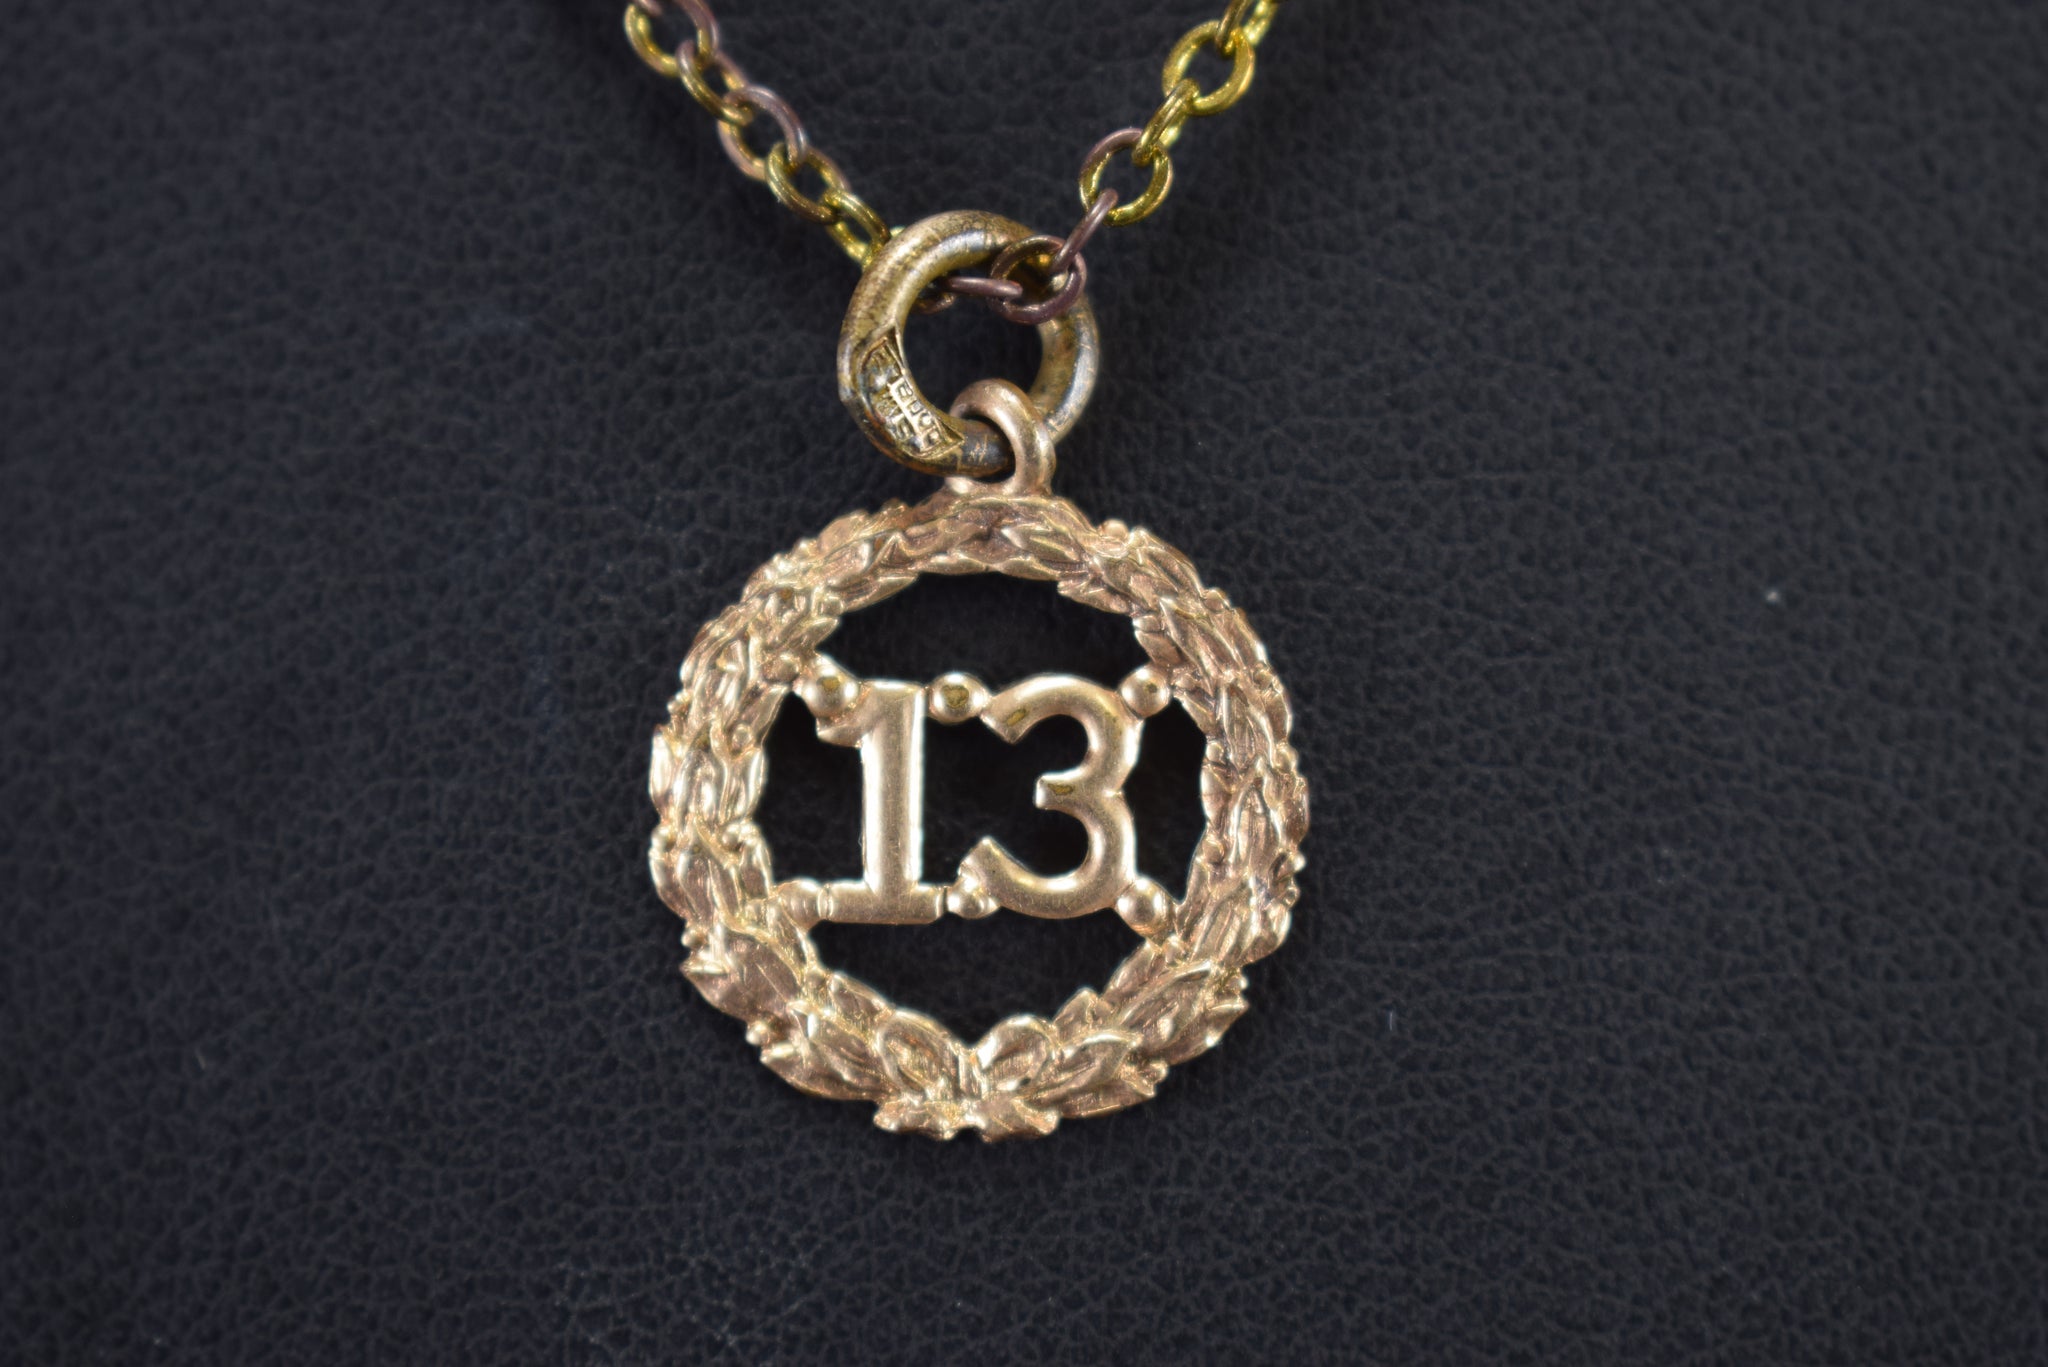 Lucky 13 Good Luck Medal Pendant Lucky Charm VINTAGE Necklace